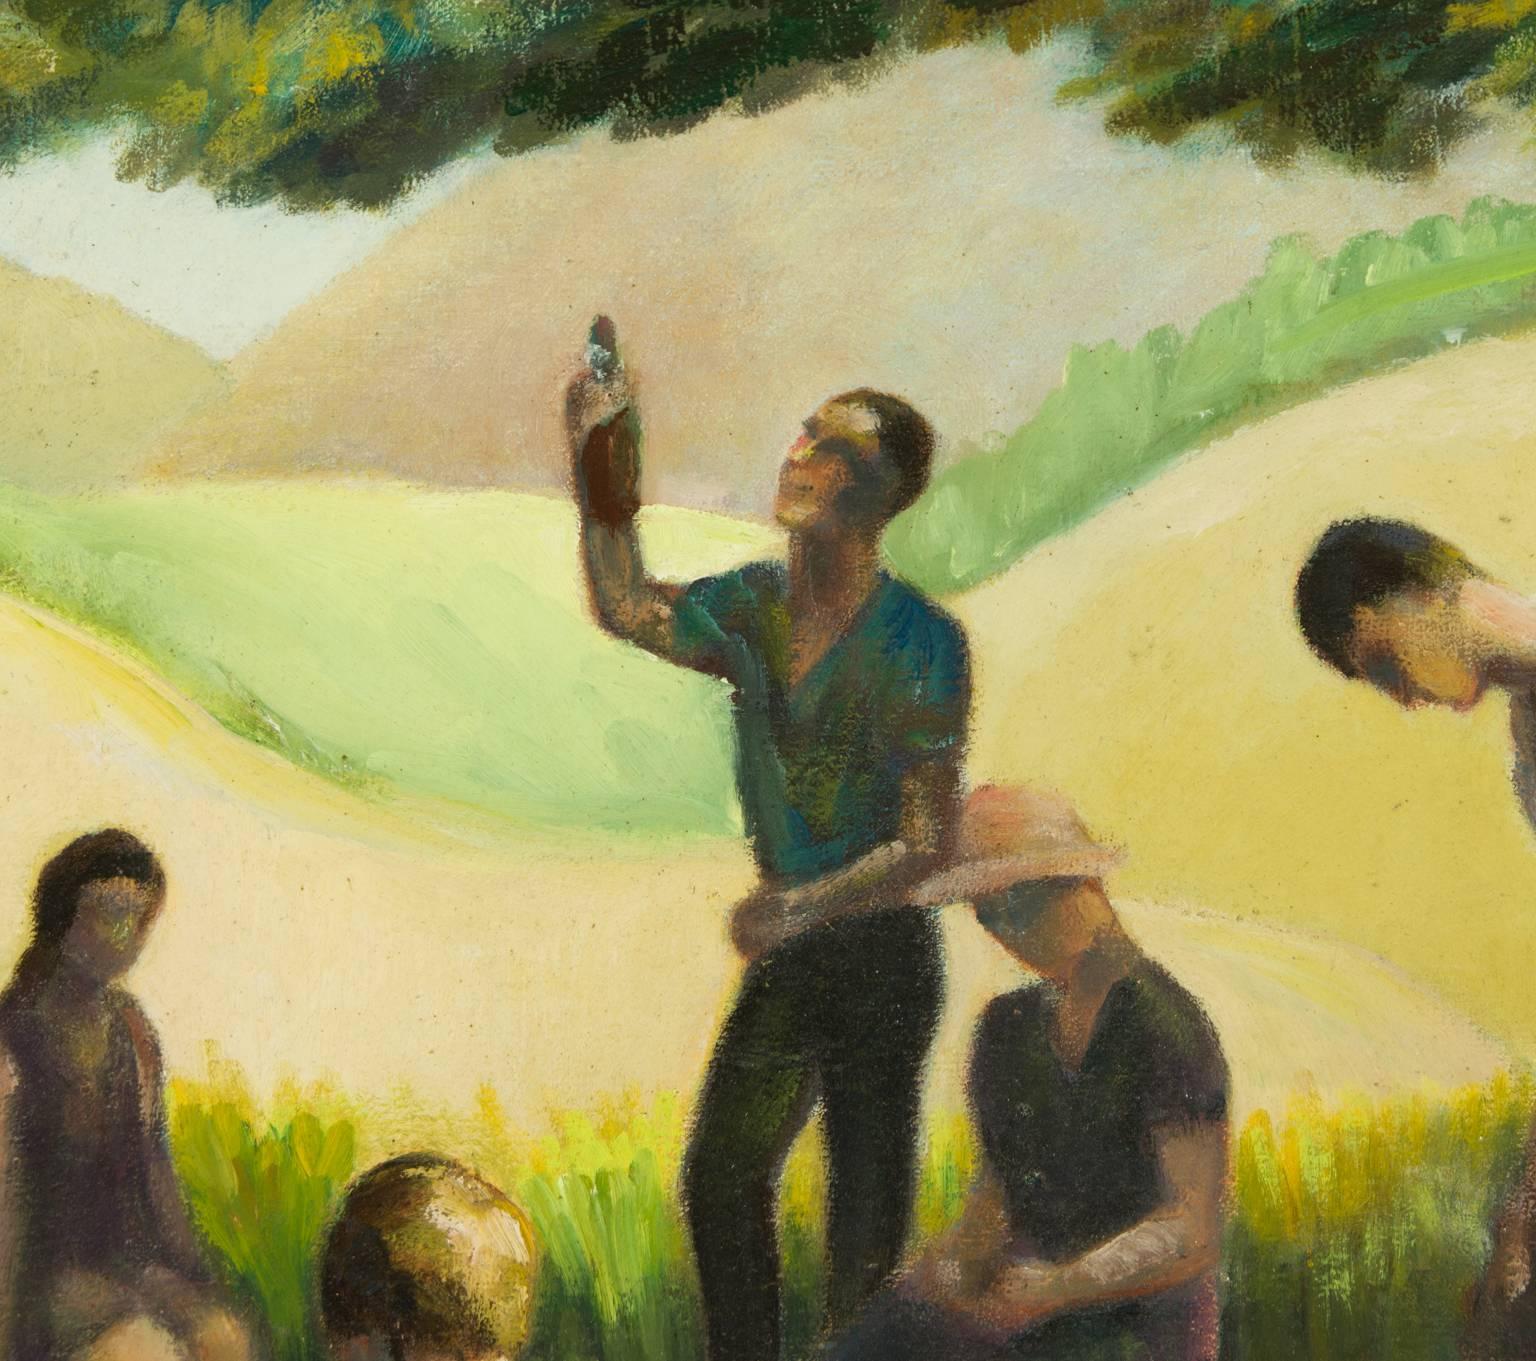 A striking Spanish style mid 20th century modernist painting, depicting figures at a picnic under the shade of trees. Well presented in a wooden cream painted frame. The painting is unsigned and painted on board.

Image Size: 48.5 x 59cm (19.1